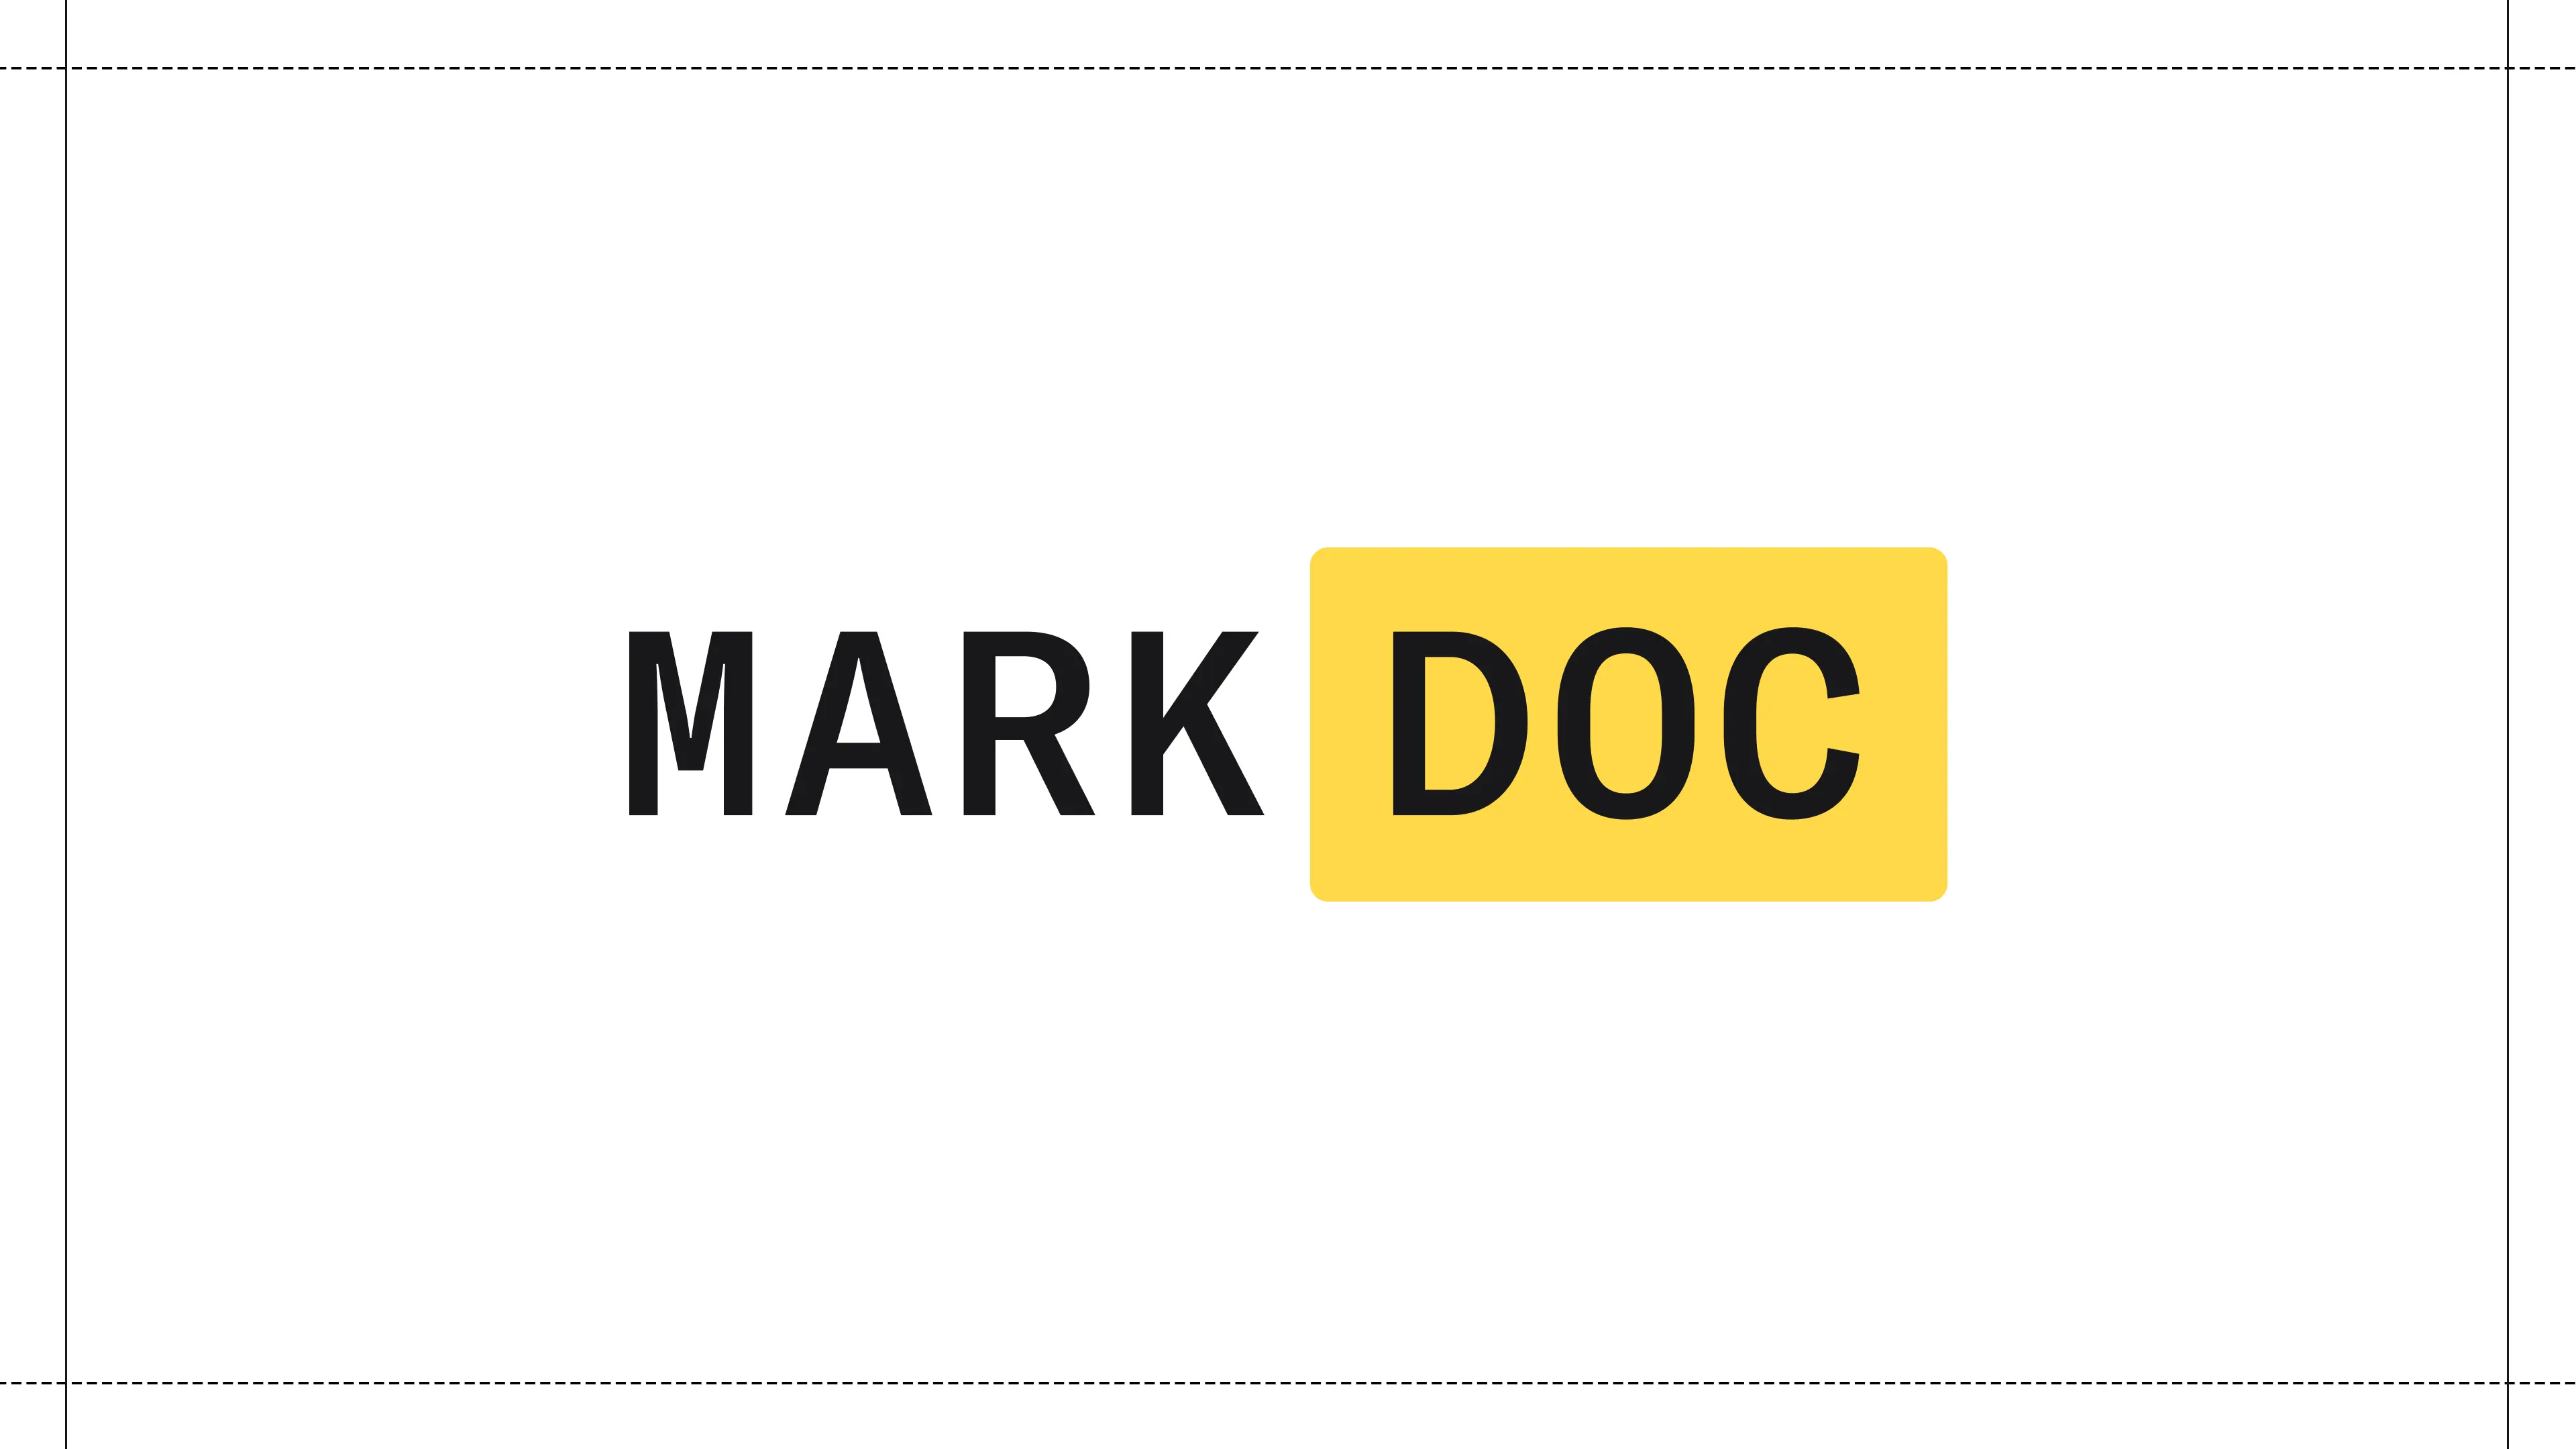 The logo for the Markdoc project